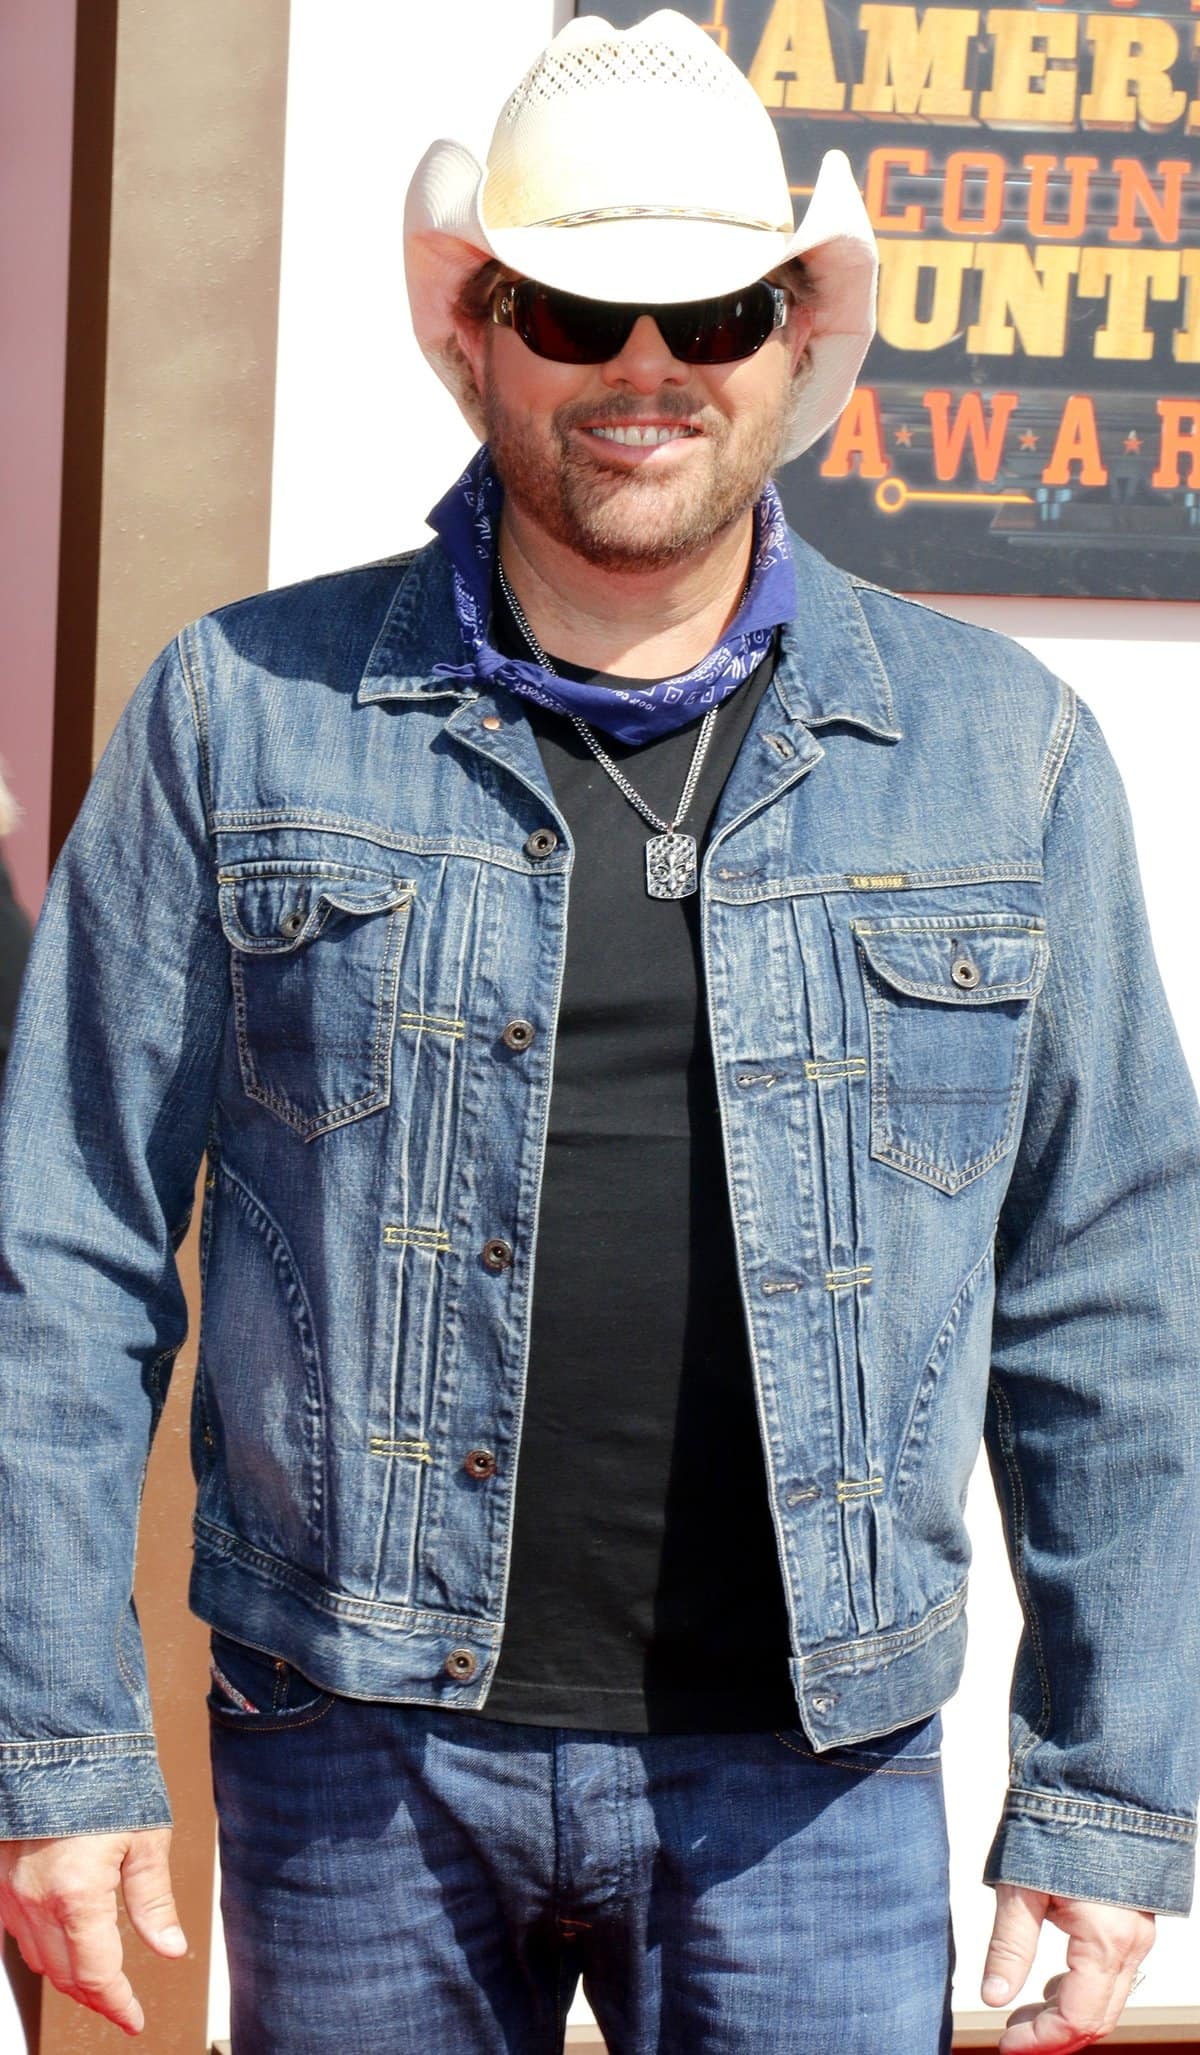 American country music singer, songwriter, actor, and record producer Toby Keith at the 2016 American Country Countdown Awards